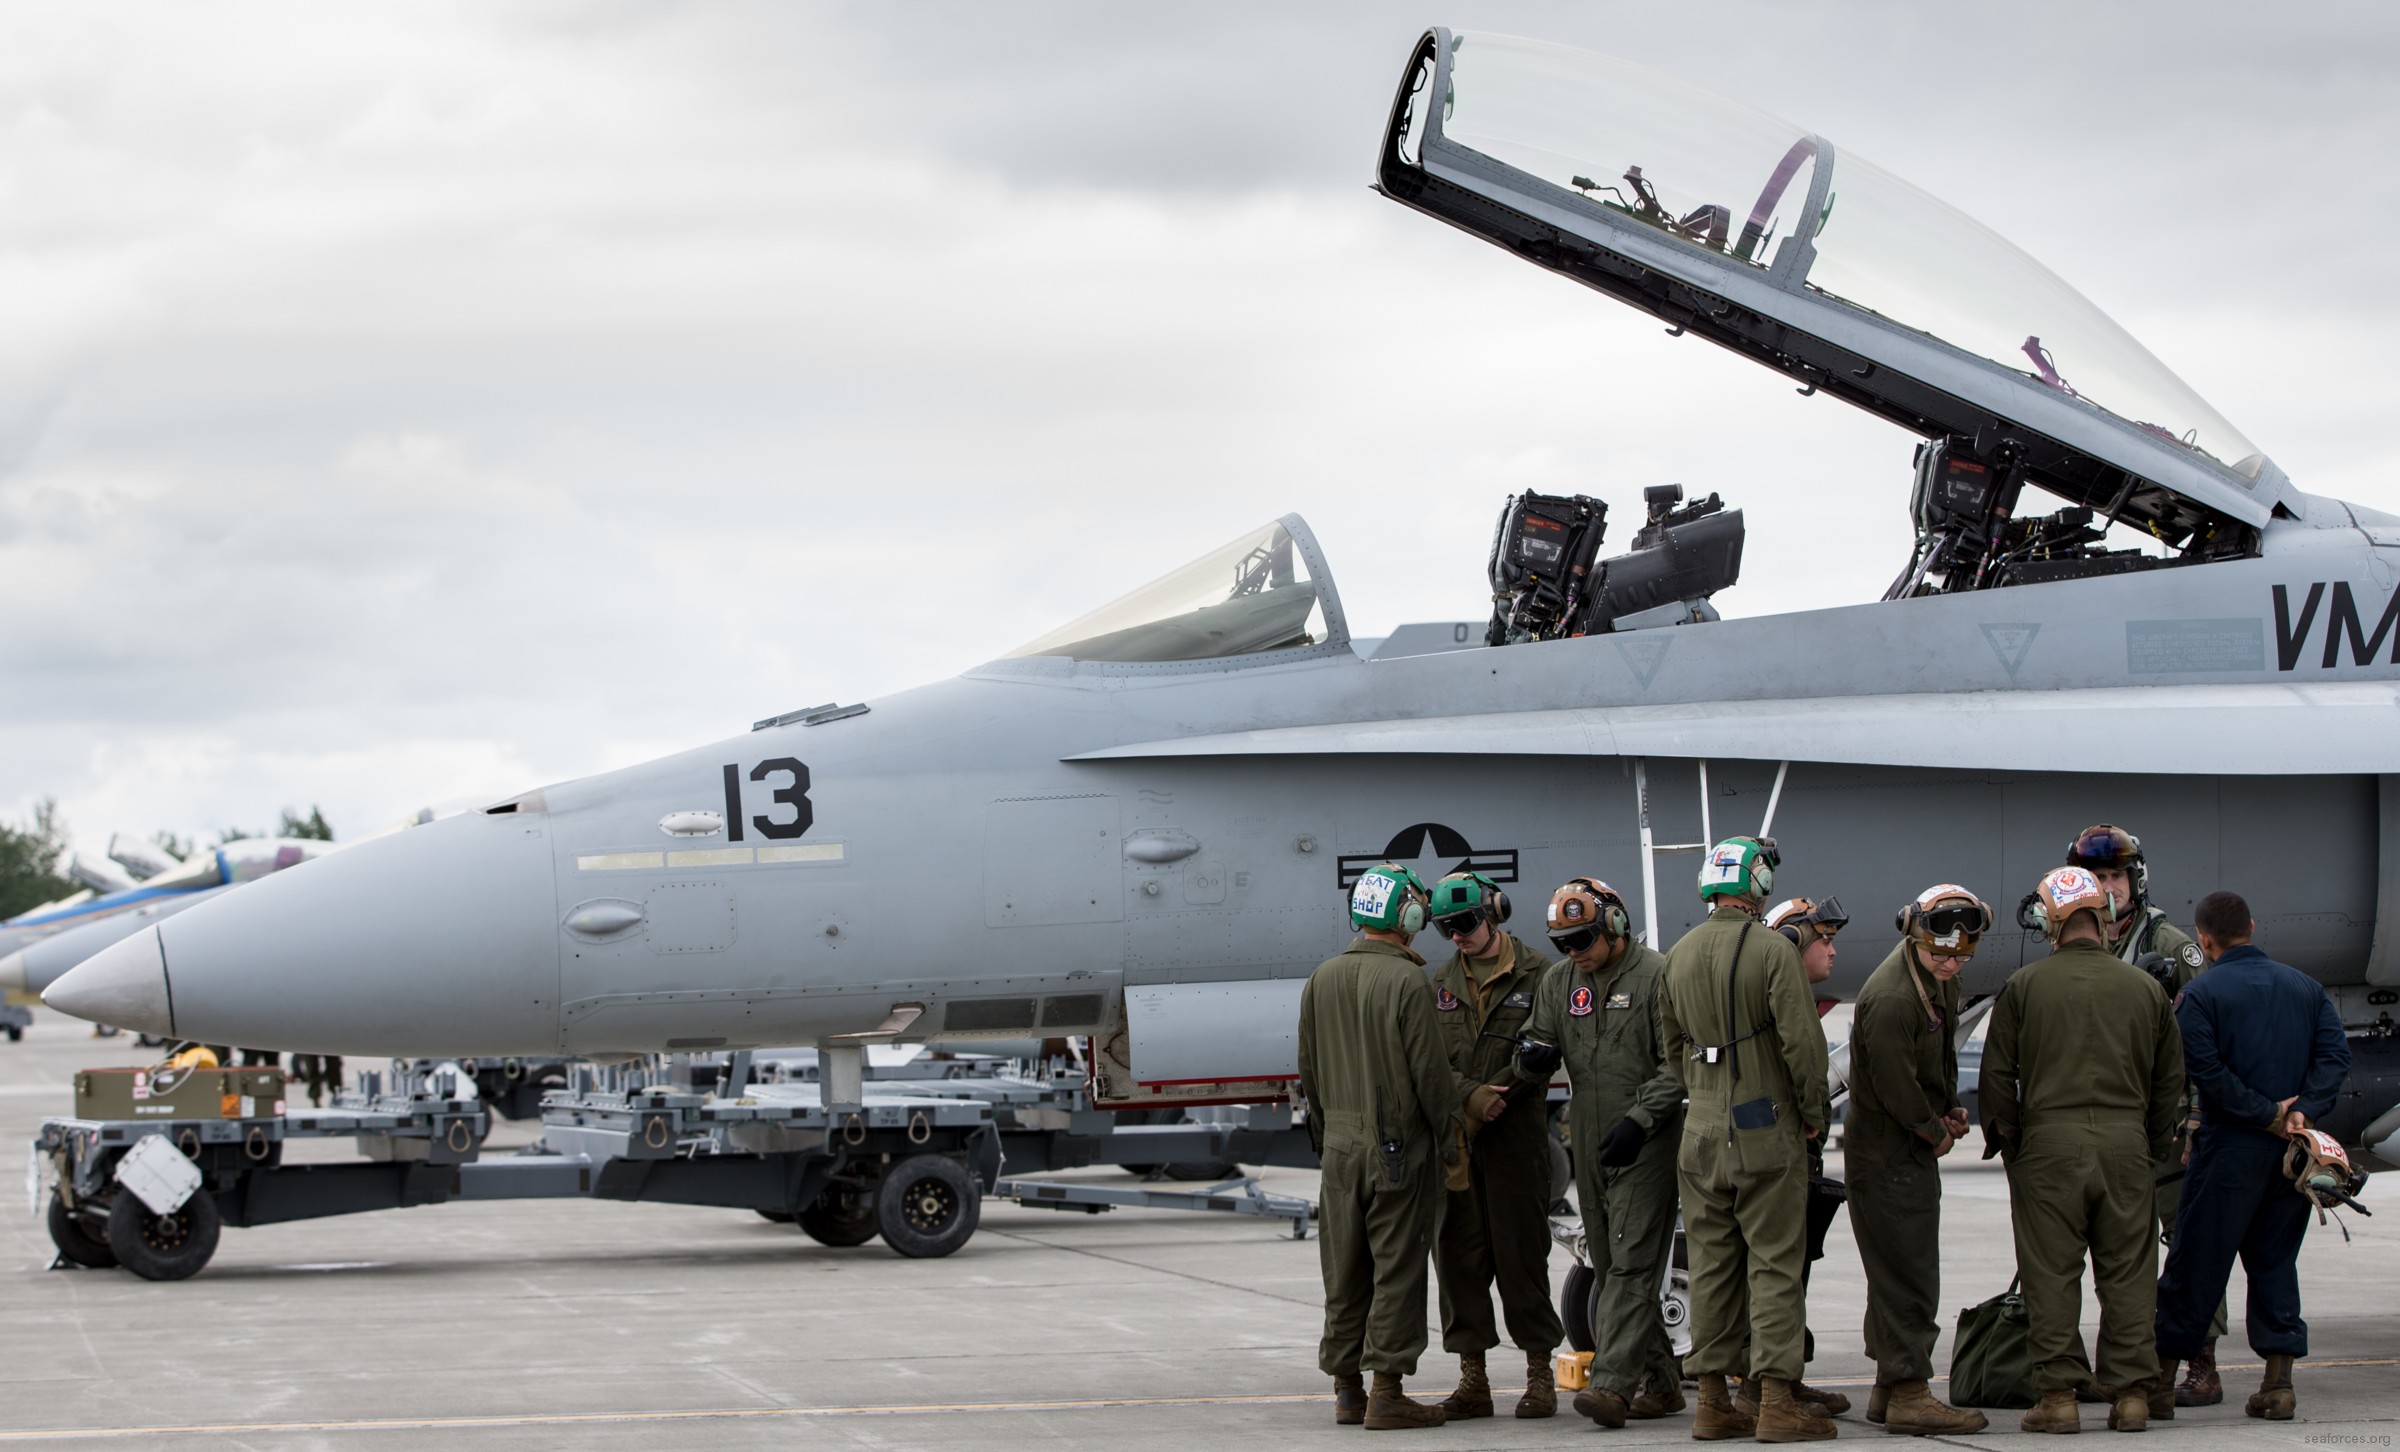 vmfa-251 thunderbolts marine fighter attack squadron f/a-18d hornet 96 exercise red flag alaska 17-2